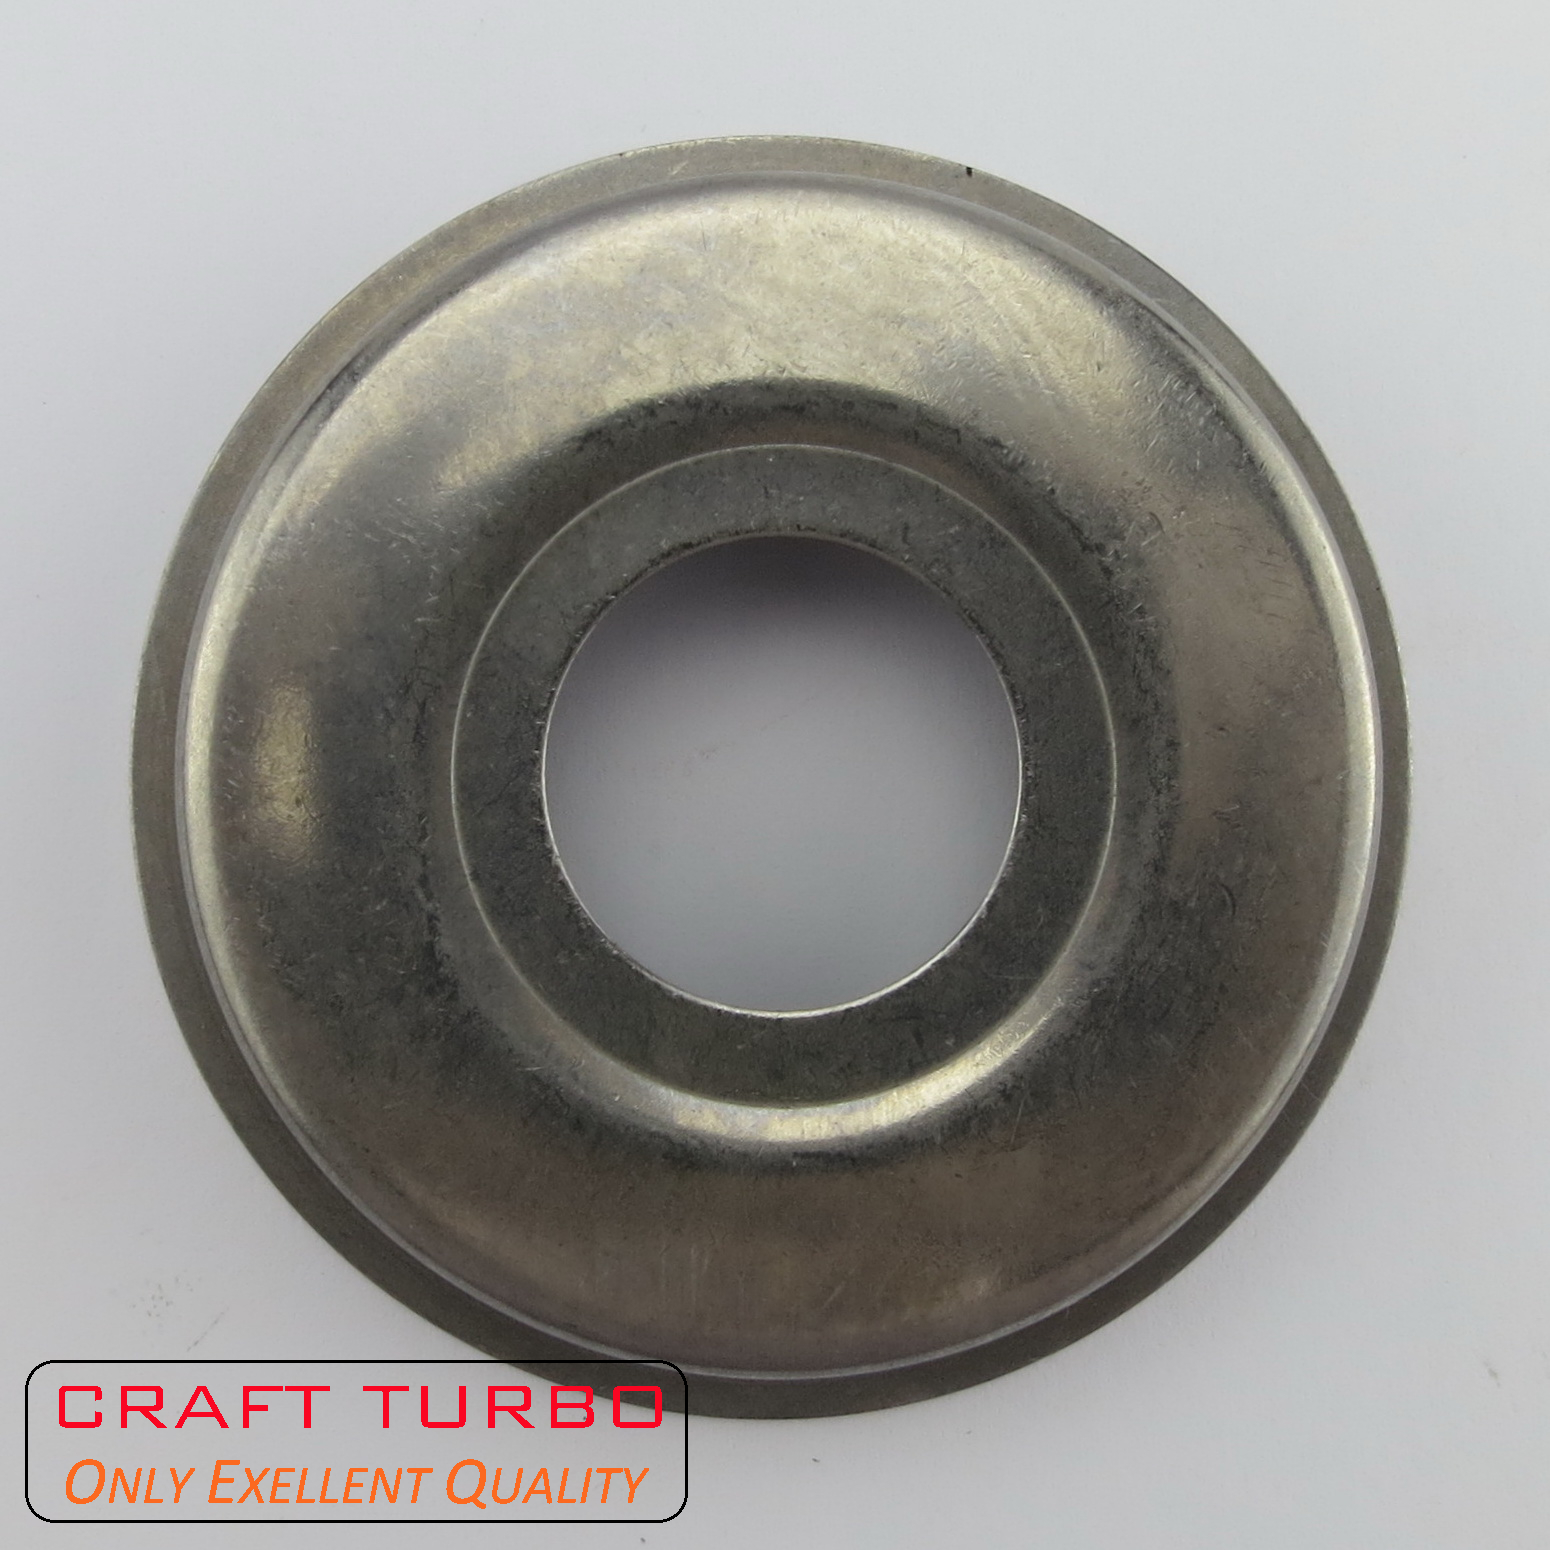 CT20 Heat Shield for Turbocharger 